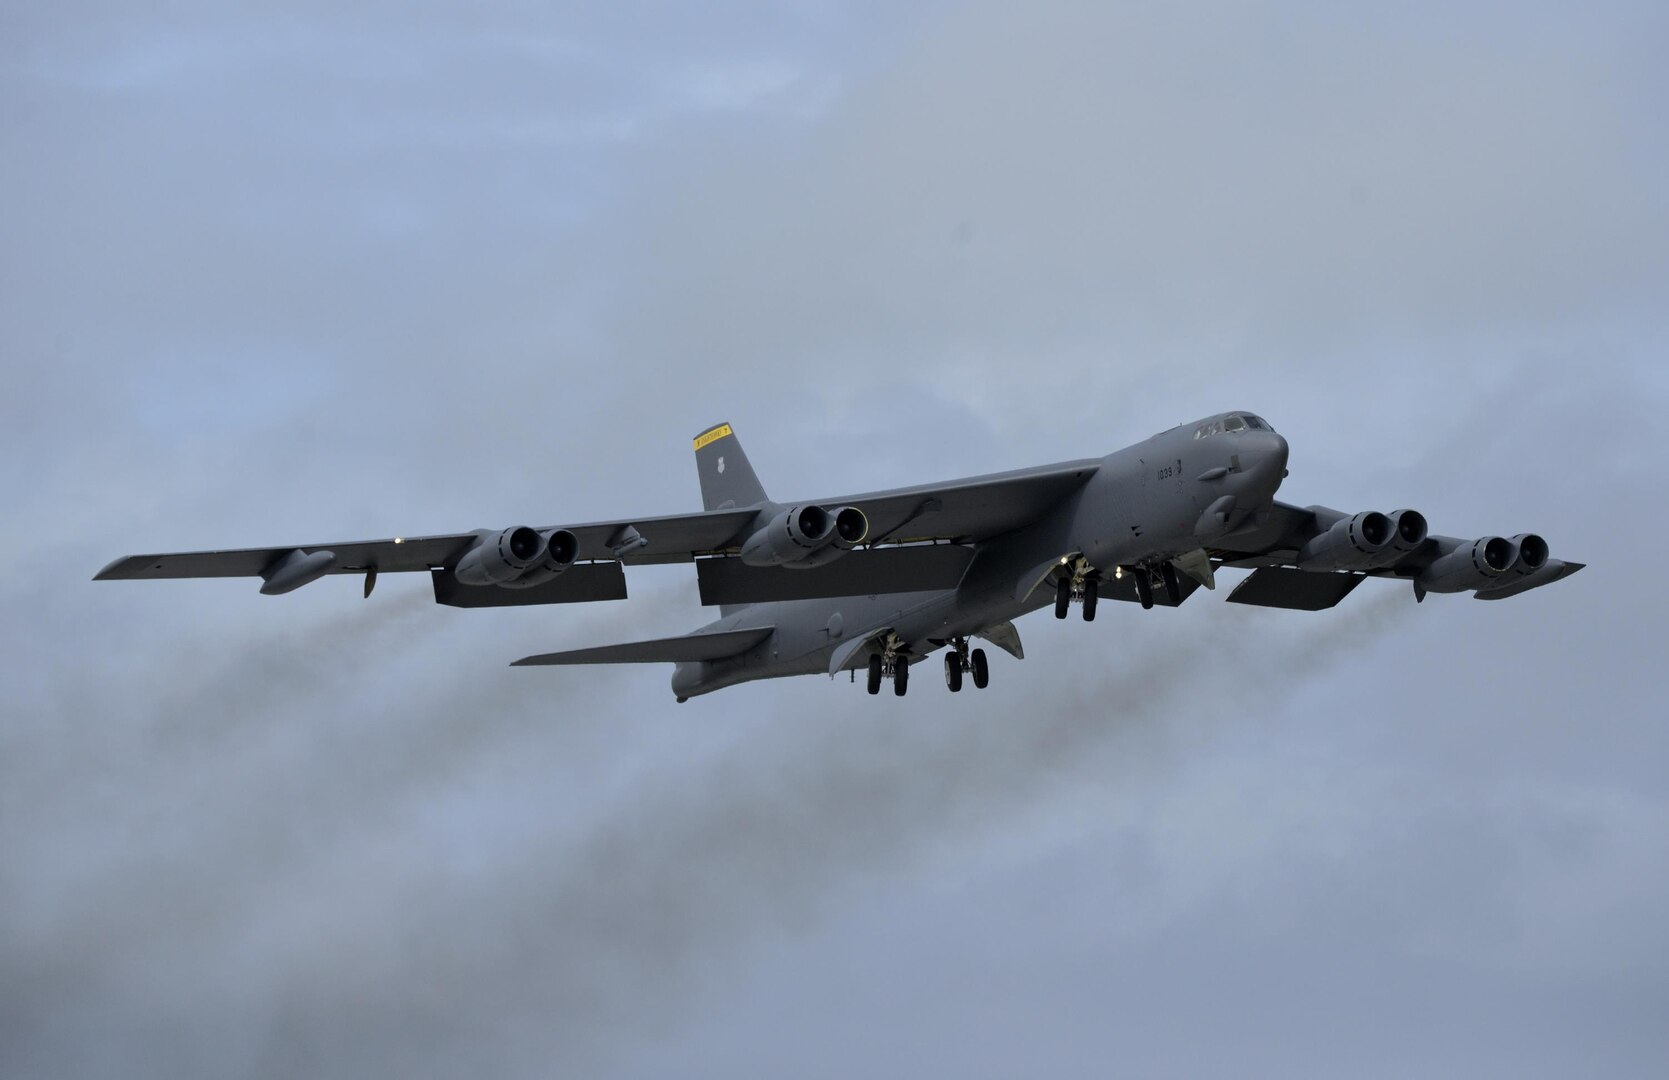 A U.S. Air Force B-52 Stratofortress takes off from Andersen Air Force Base, Guam, after a short deployment Dec. 17, 2016. This short-term deployment helped to ensure the bomber crews maintain a high state of readiness and crew proficiency, and provided opportunities to integrate capabilities with regional partners in the Indo-Asia-Pacific region.